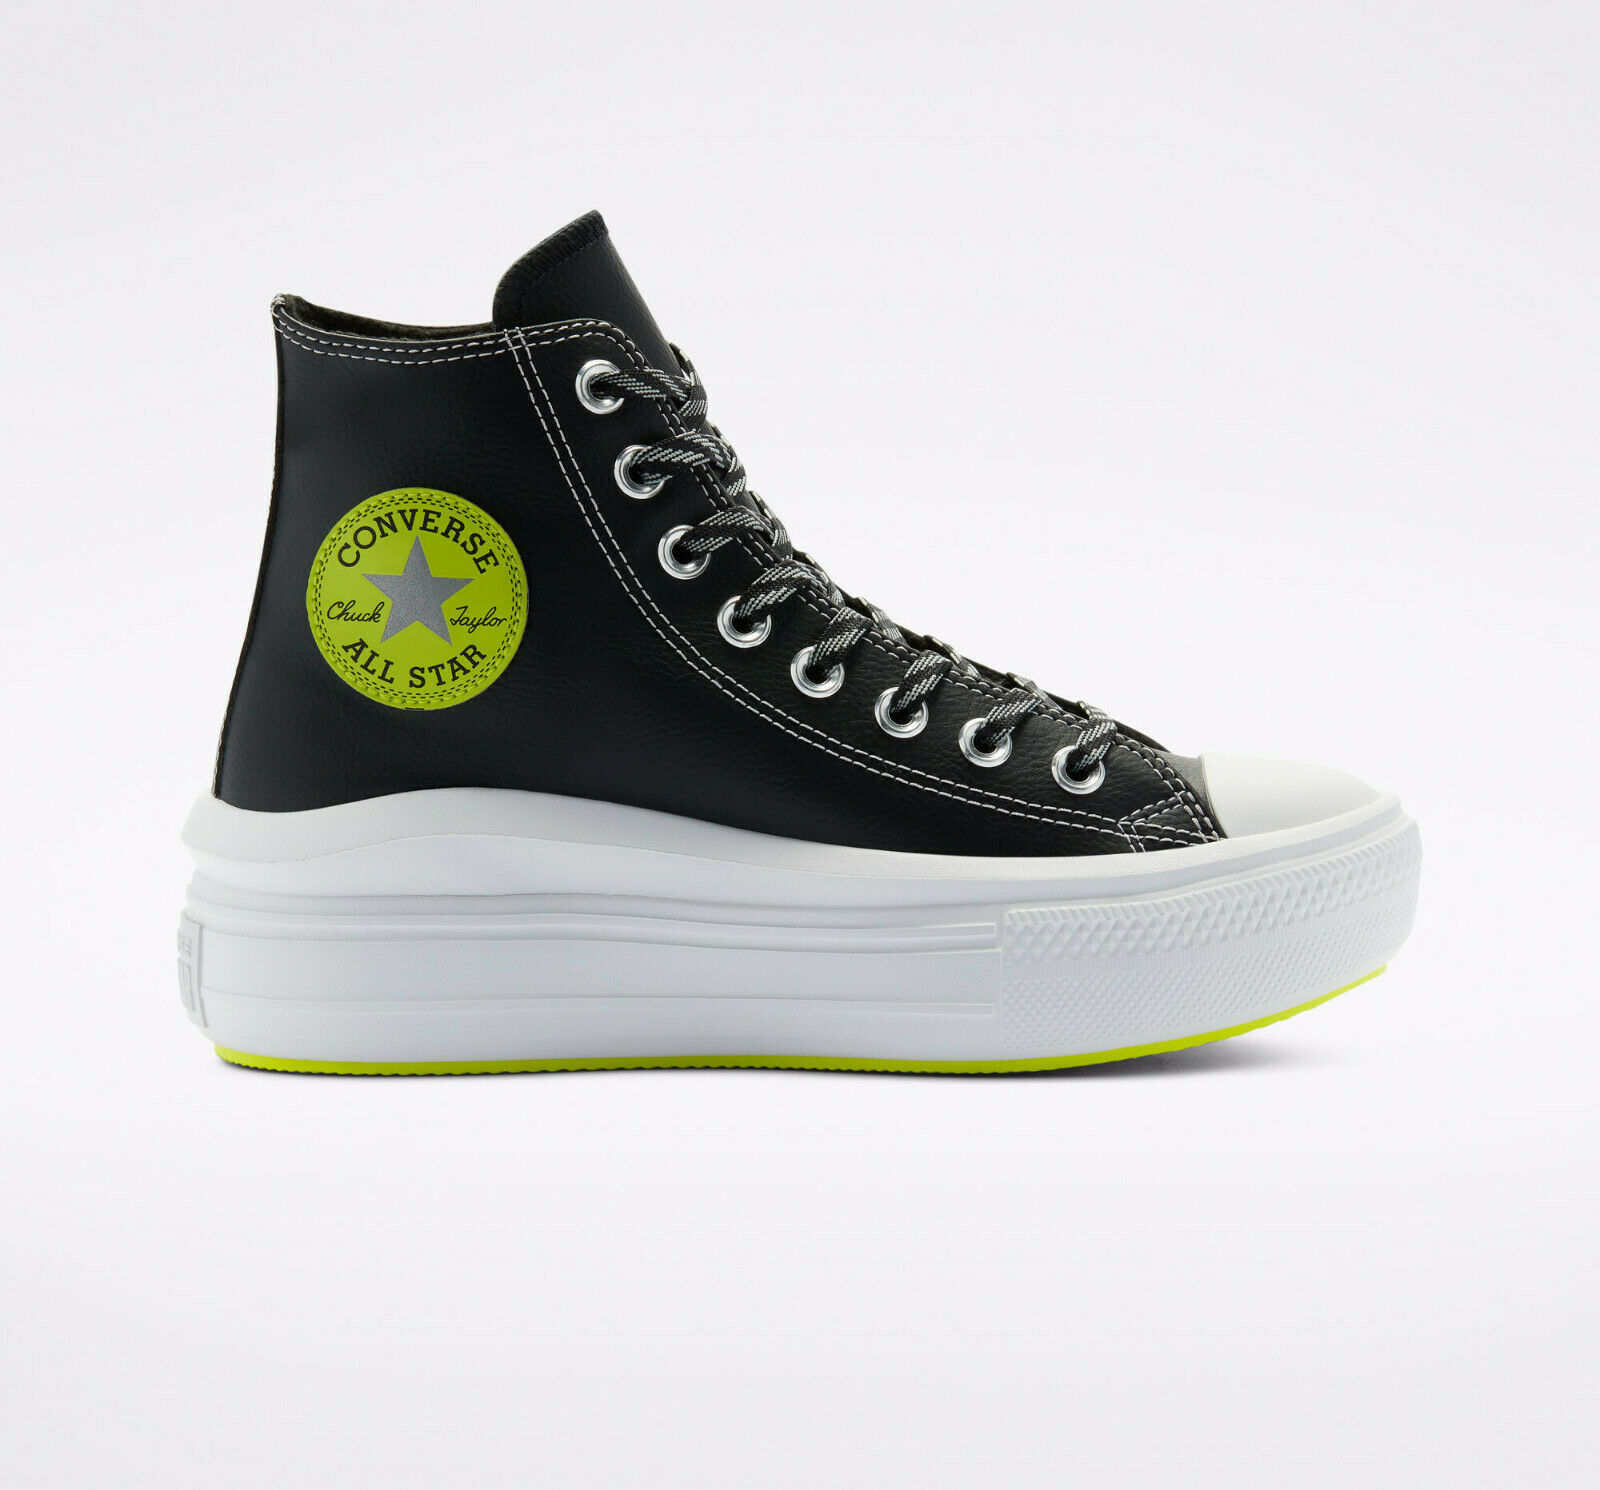 Converse Chuck Taylor All Star Move High Top Water Resistant Shoes ...